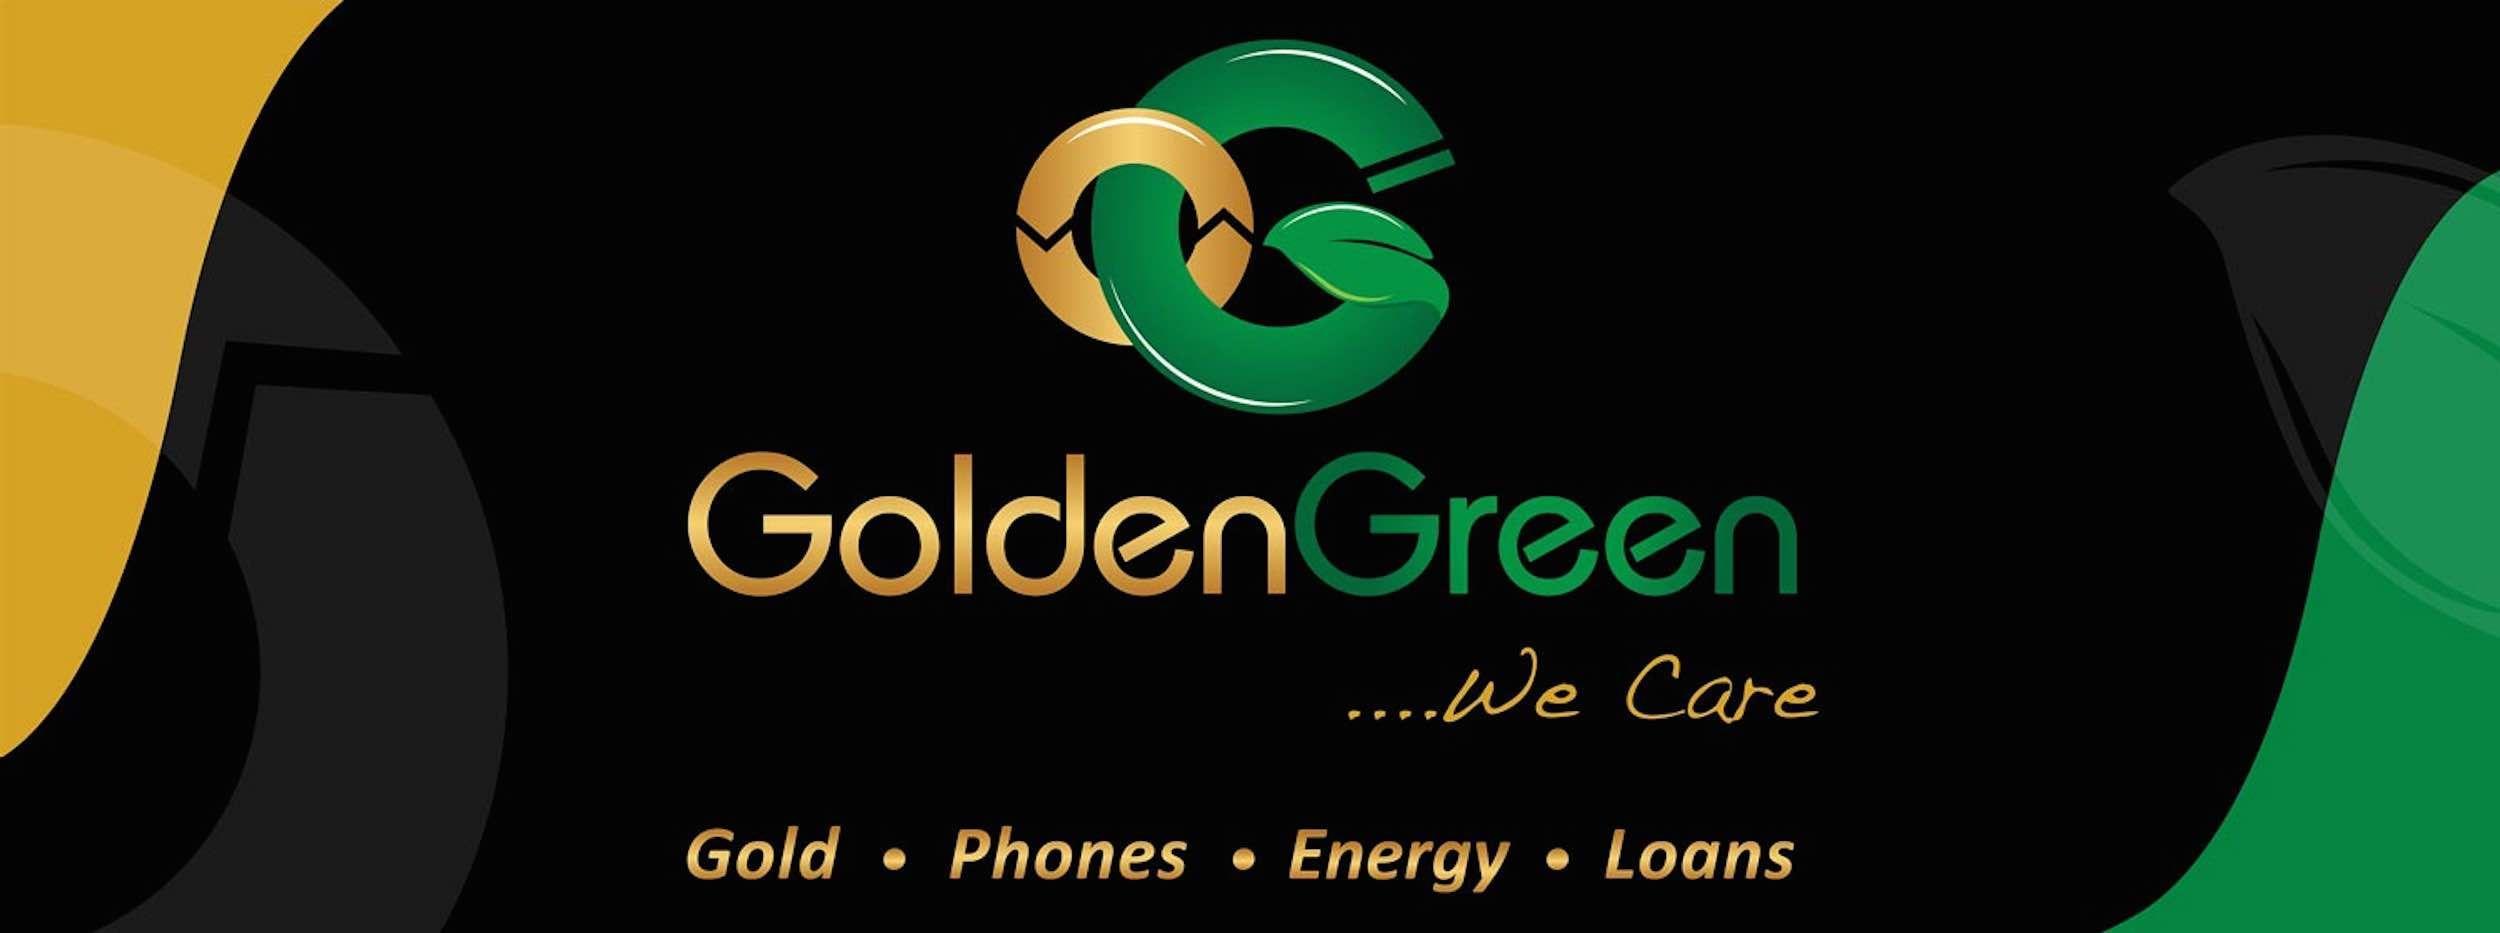 Gold and Green Logo - GoldenGreen - Home